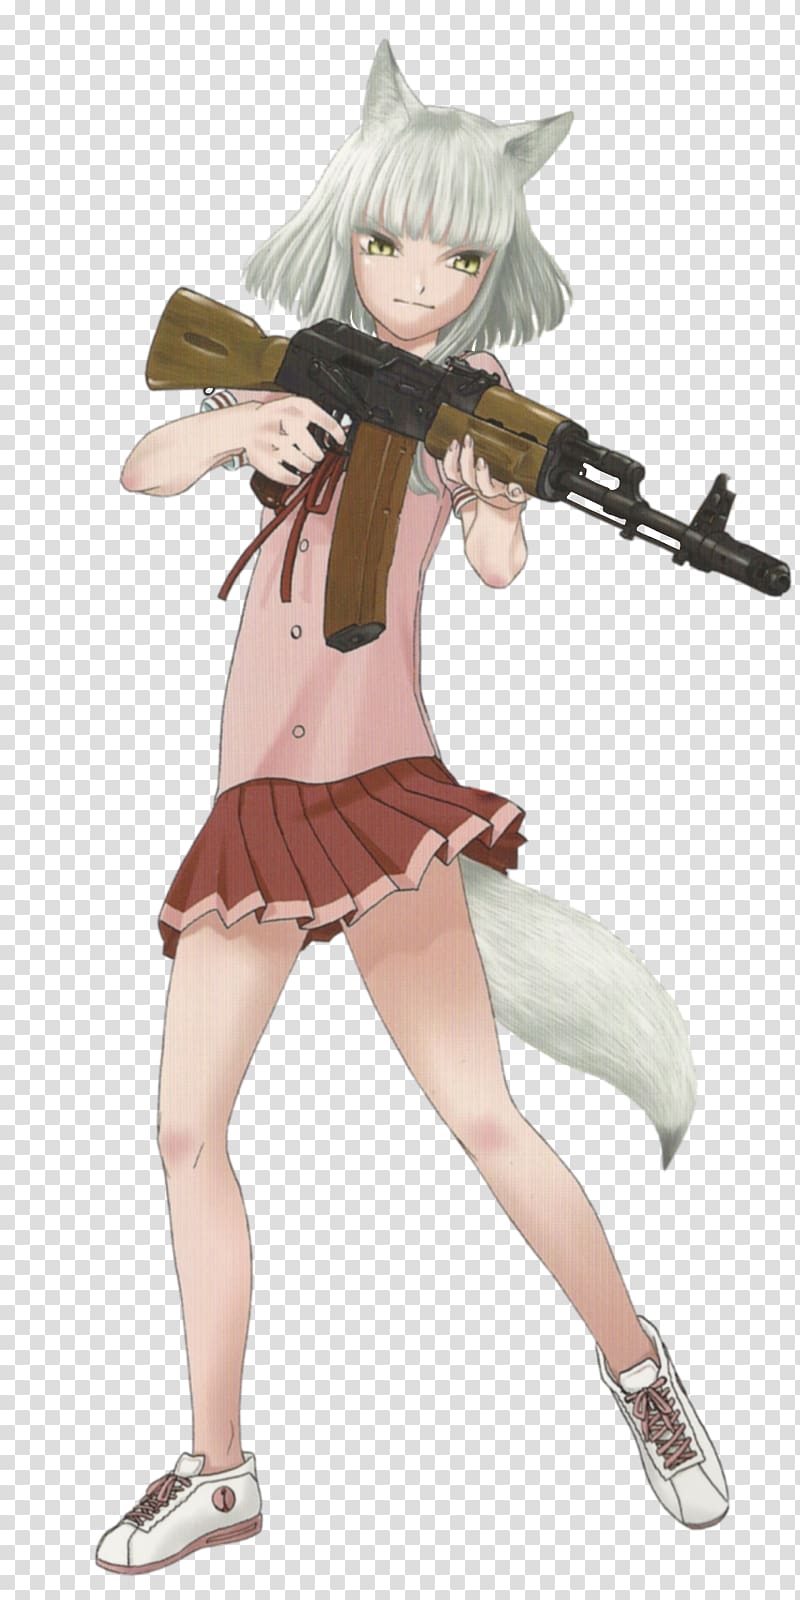 Anime Waifu AK-47 オリジナルアニメ Character, Anime transparent background PNG clipart